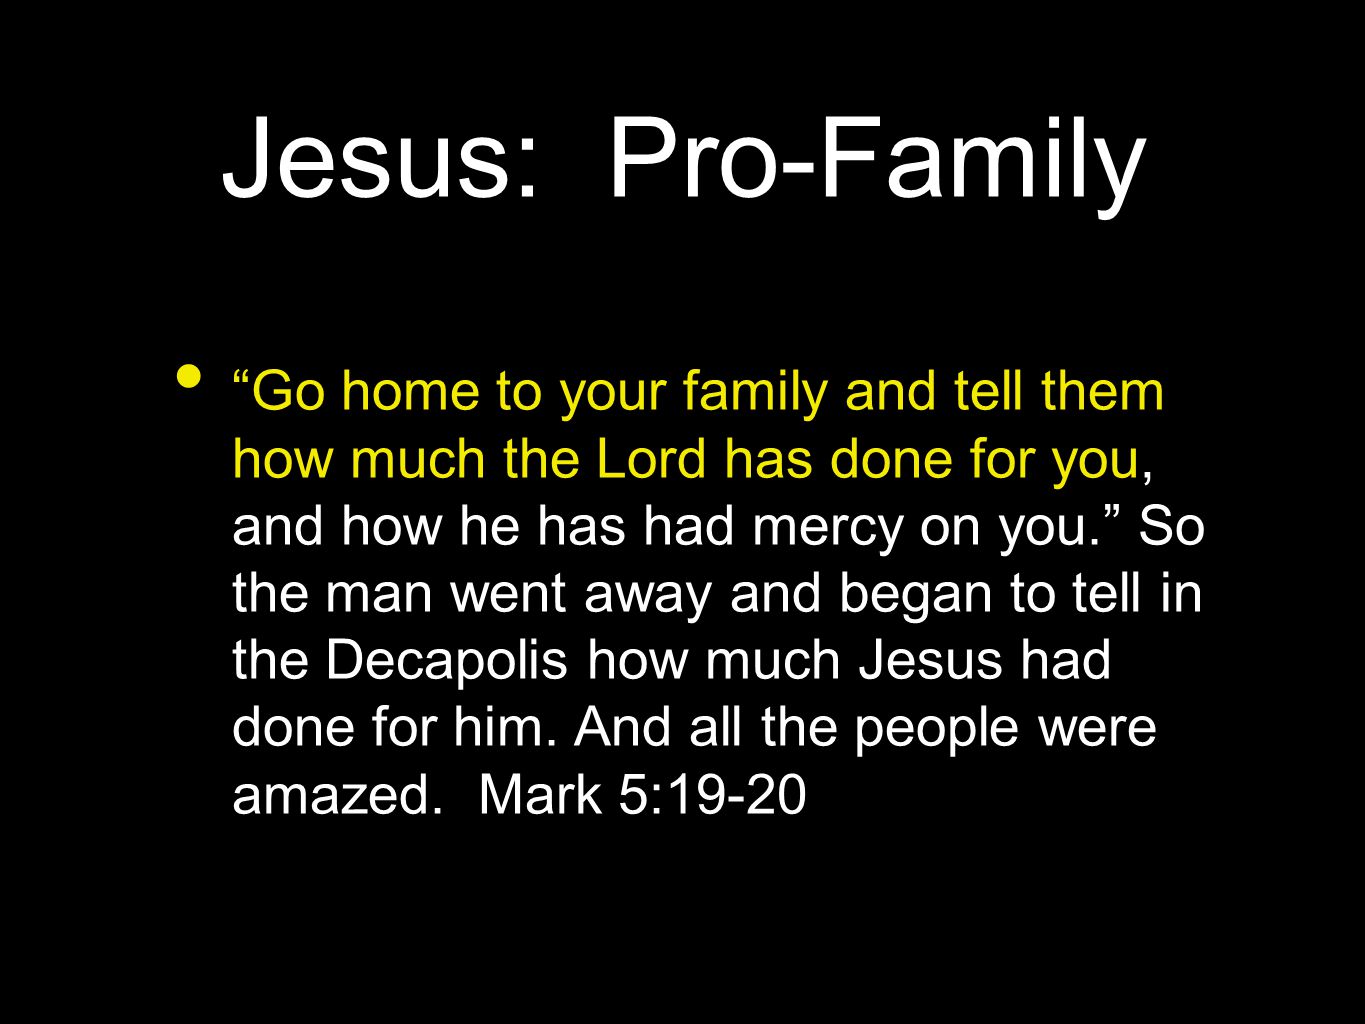 Jesus: Pro-Family Go home to your family and tell them how much the Lord has done for you, and how he has had mercy on you. So the man went away and began to tell in the Decapolis how much Jesus had done for him.